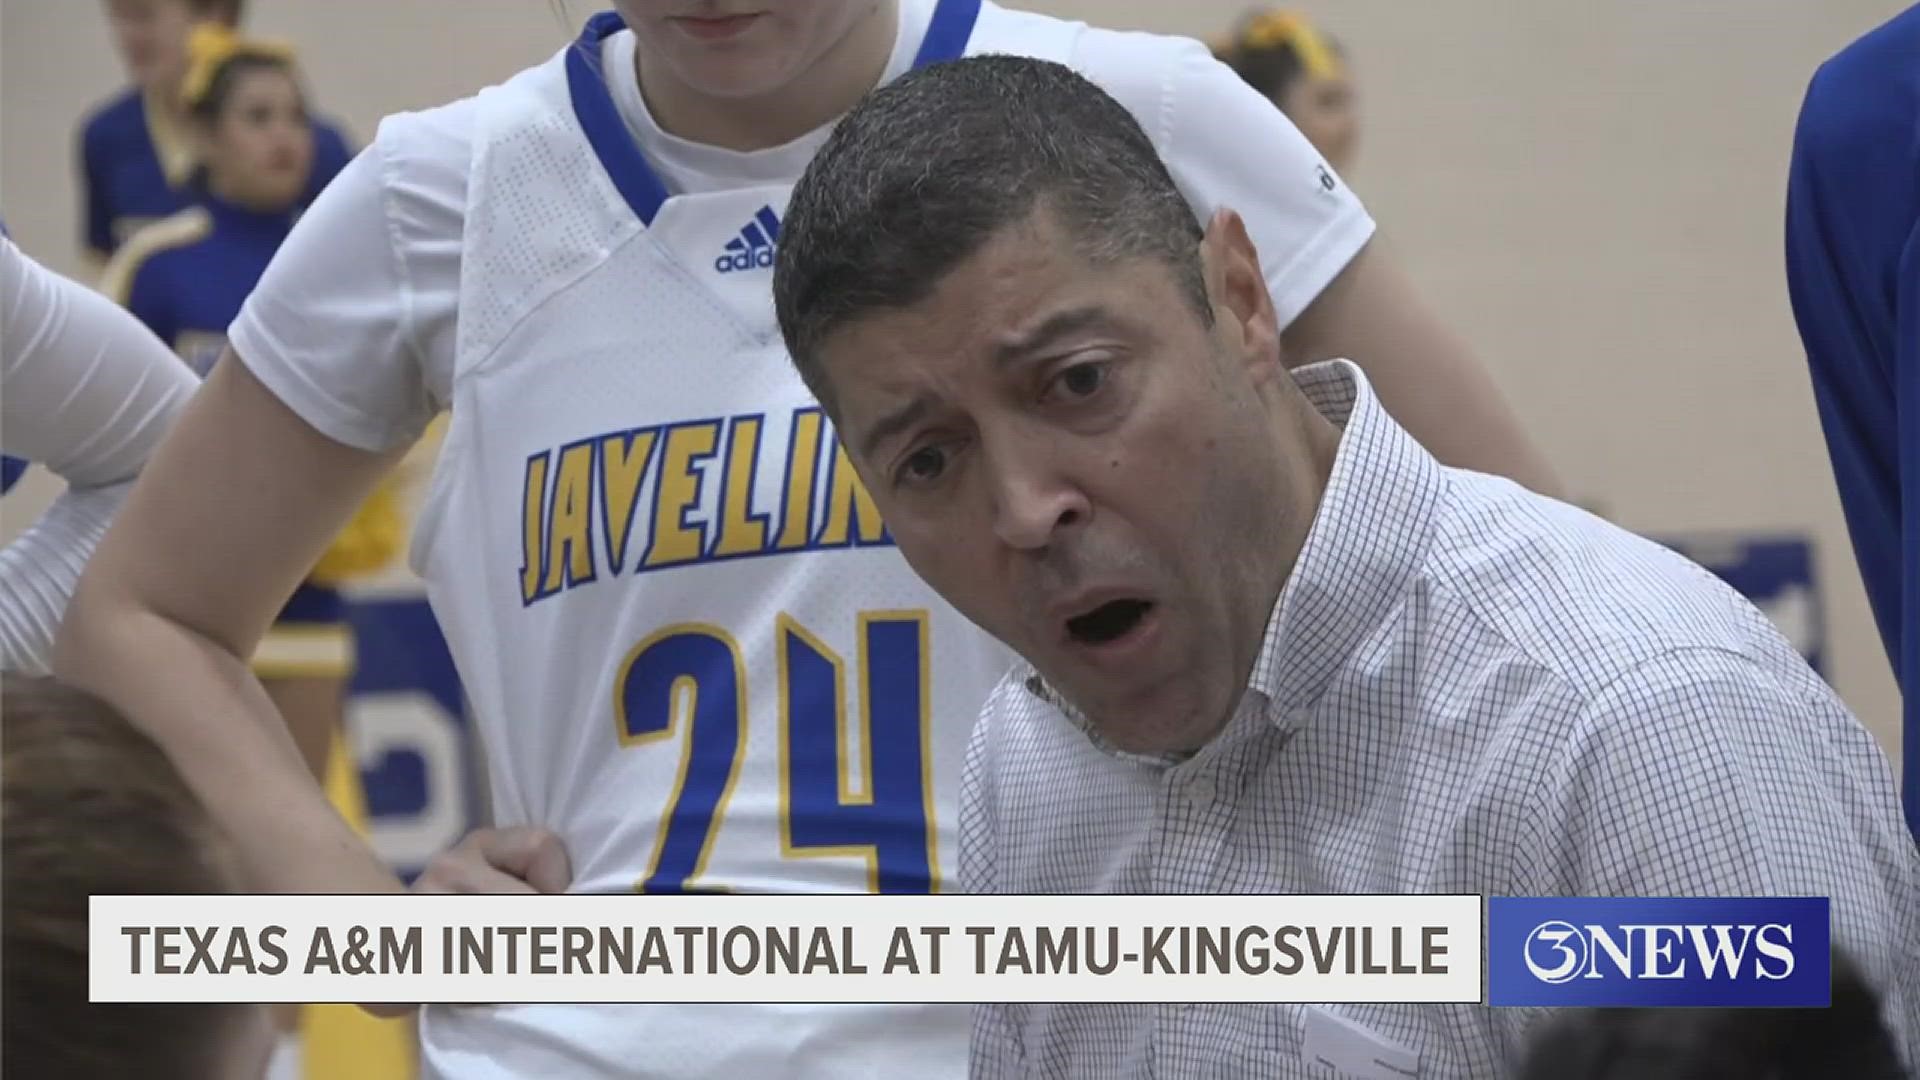 Texas A&M-Kingsville is currently sixth in the regional rankings with one regular season game to go.